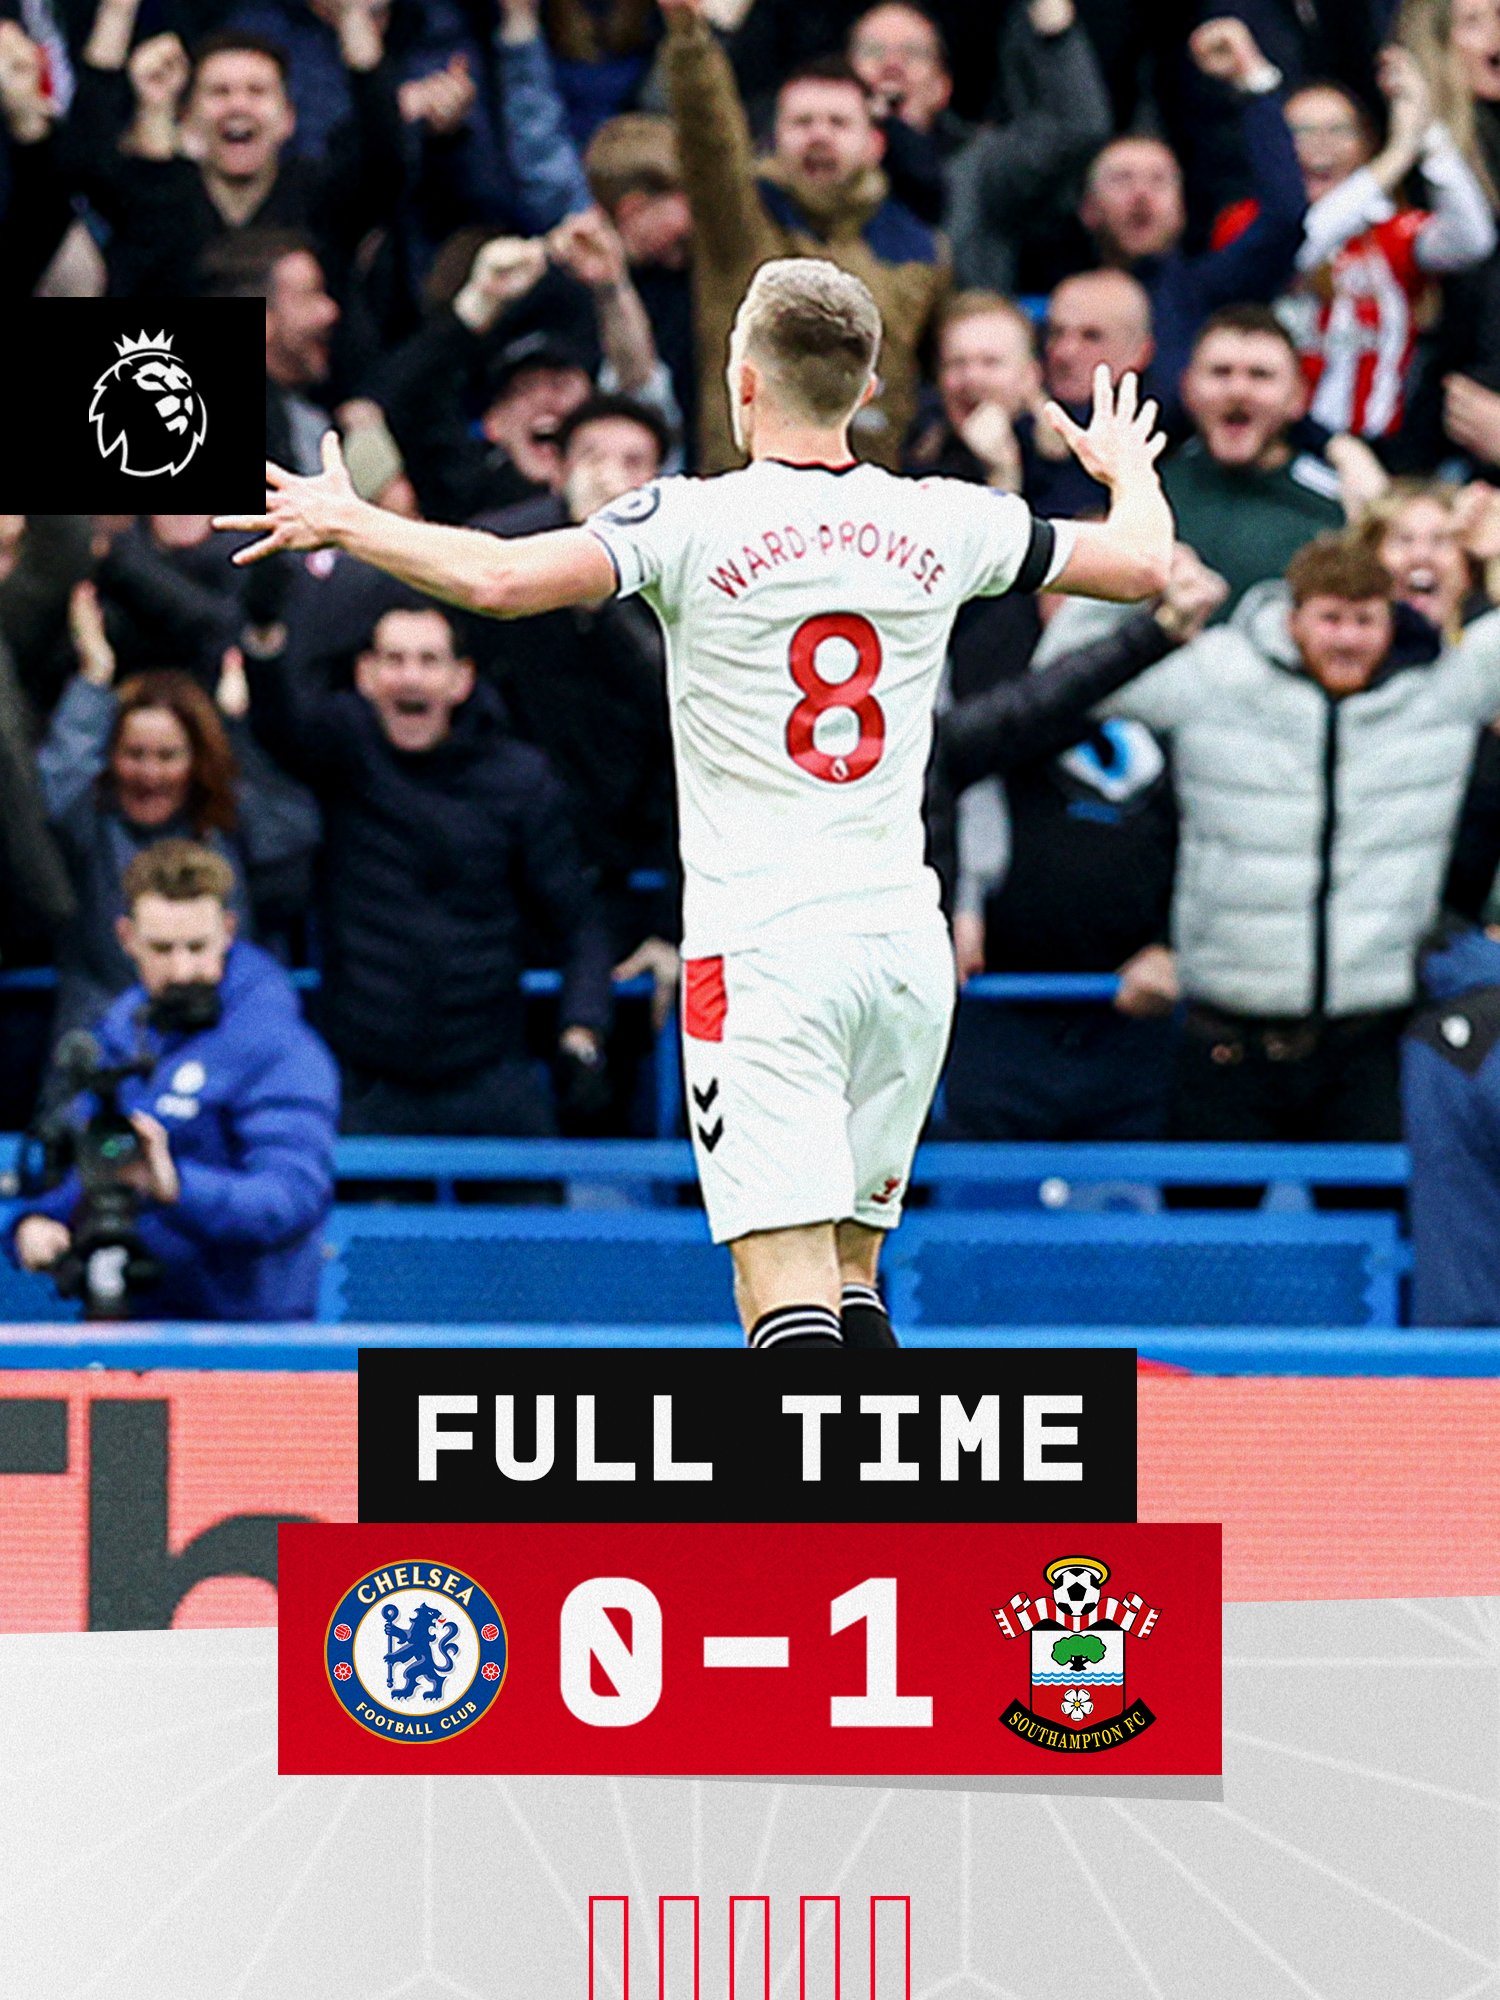 Full time: Chelsea 0, Southampton 1. The score graphic shows James Ward-Prowse celebrating in front of the Southampton fans with his arms stretched wide following his goal.